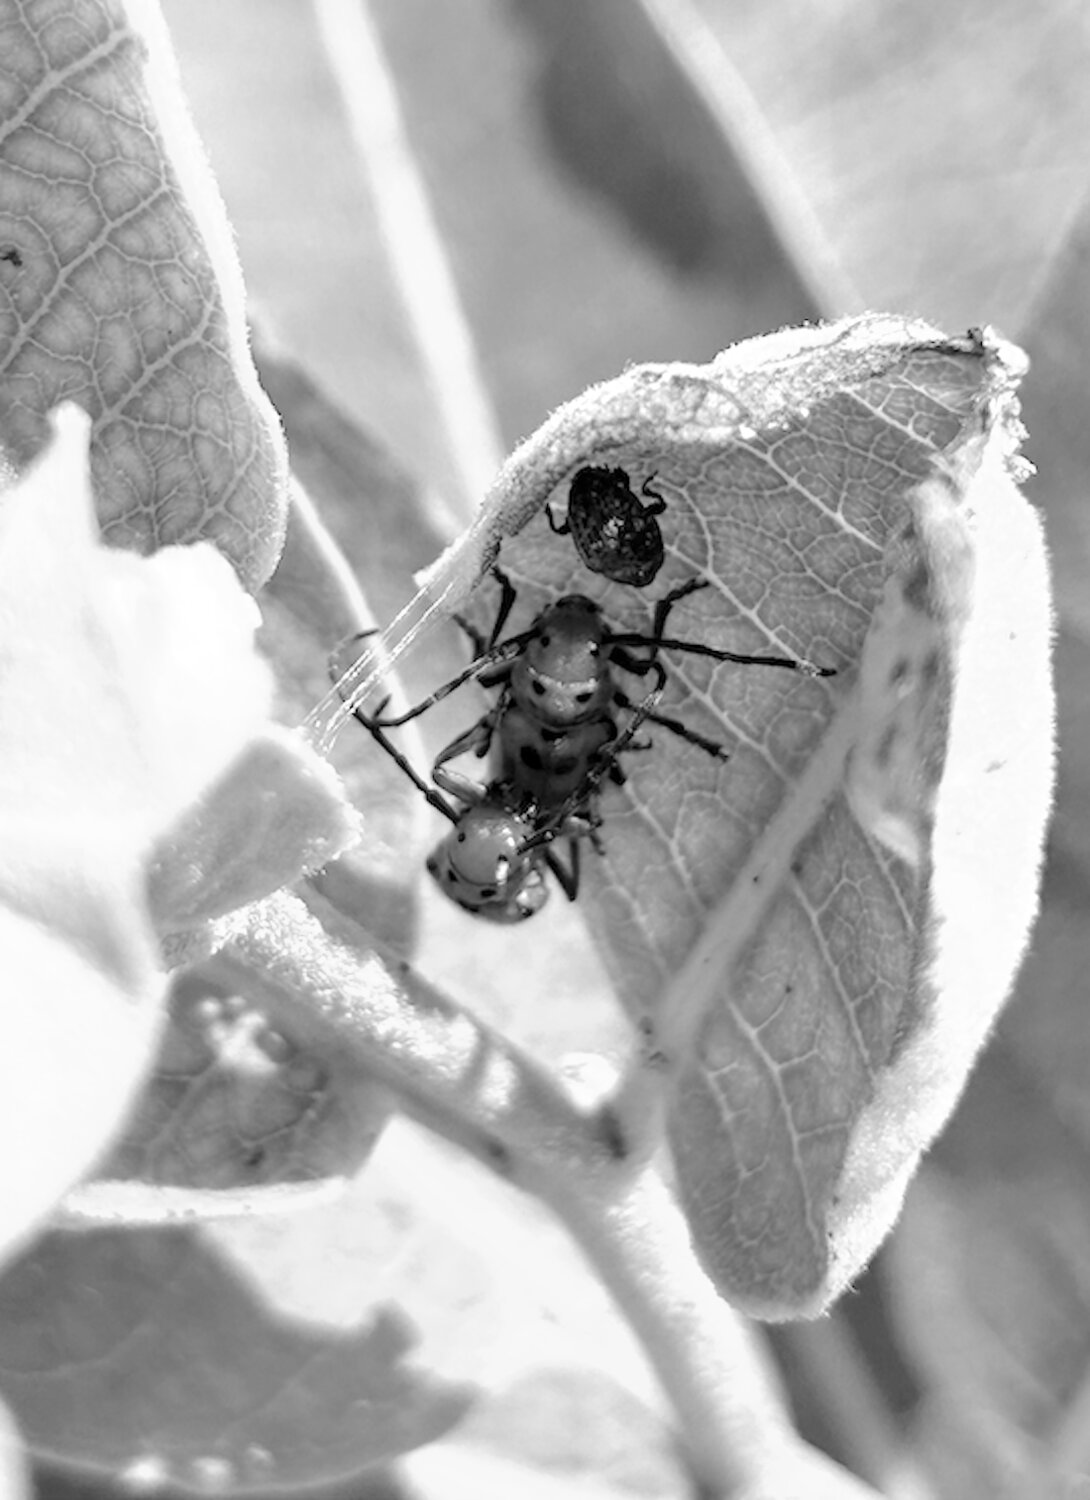 Bugs are an important part of many bird diets and other natural processes, shown here in black and white at the Dunes Park Reserve.